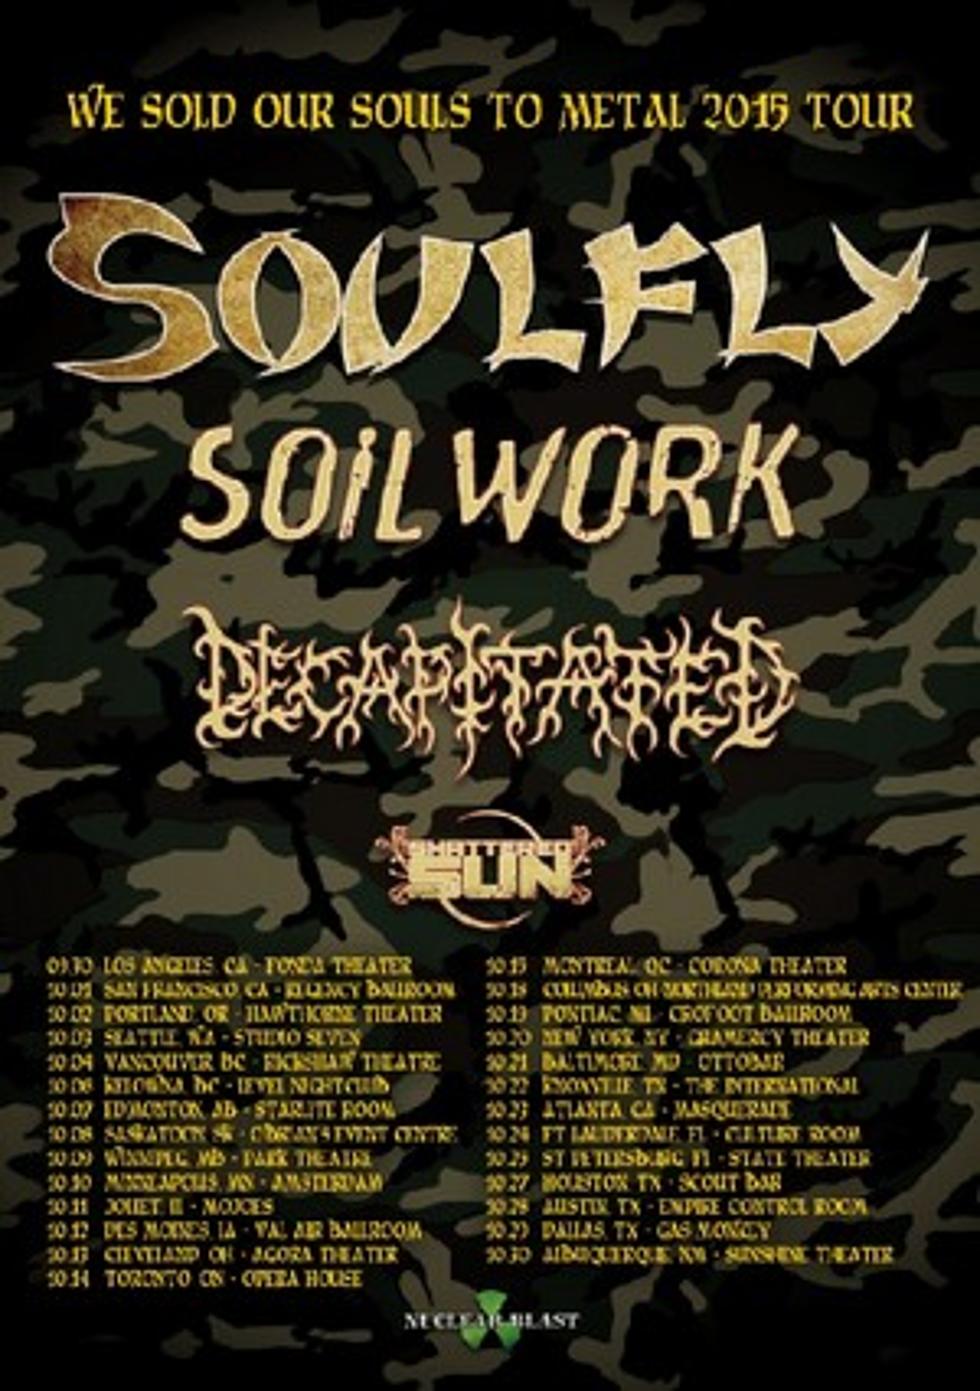 Soulfly Plan Fall North American Tour With Soilwork, Decapitated and Shattered Sun